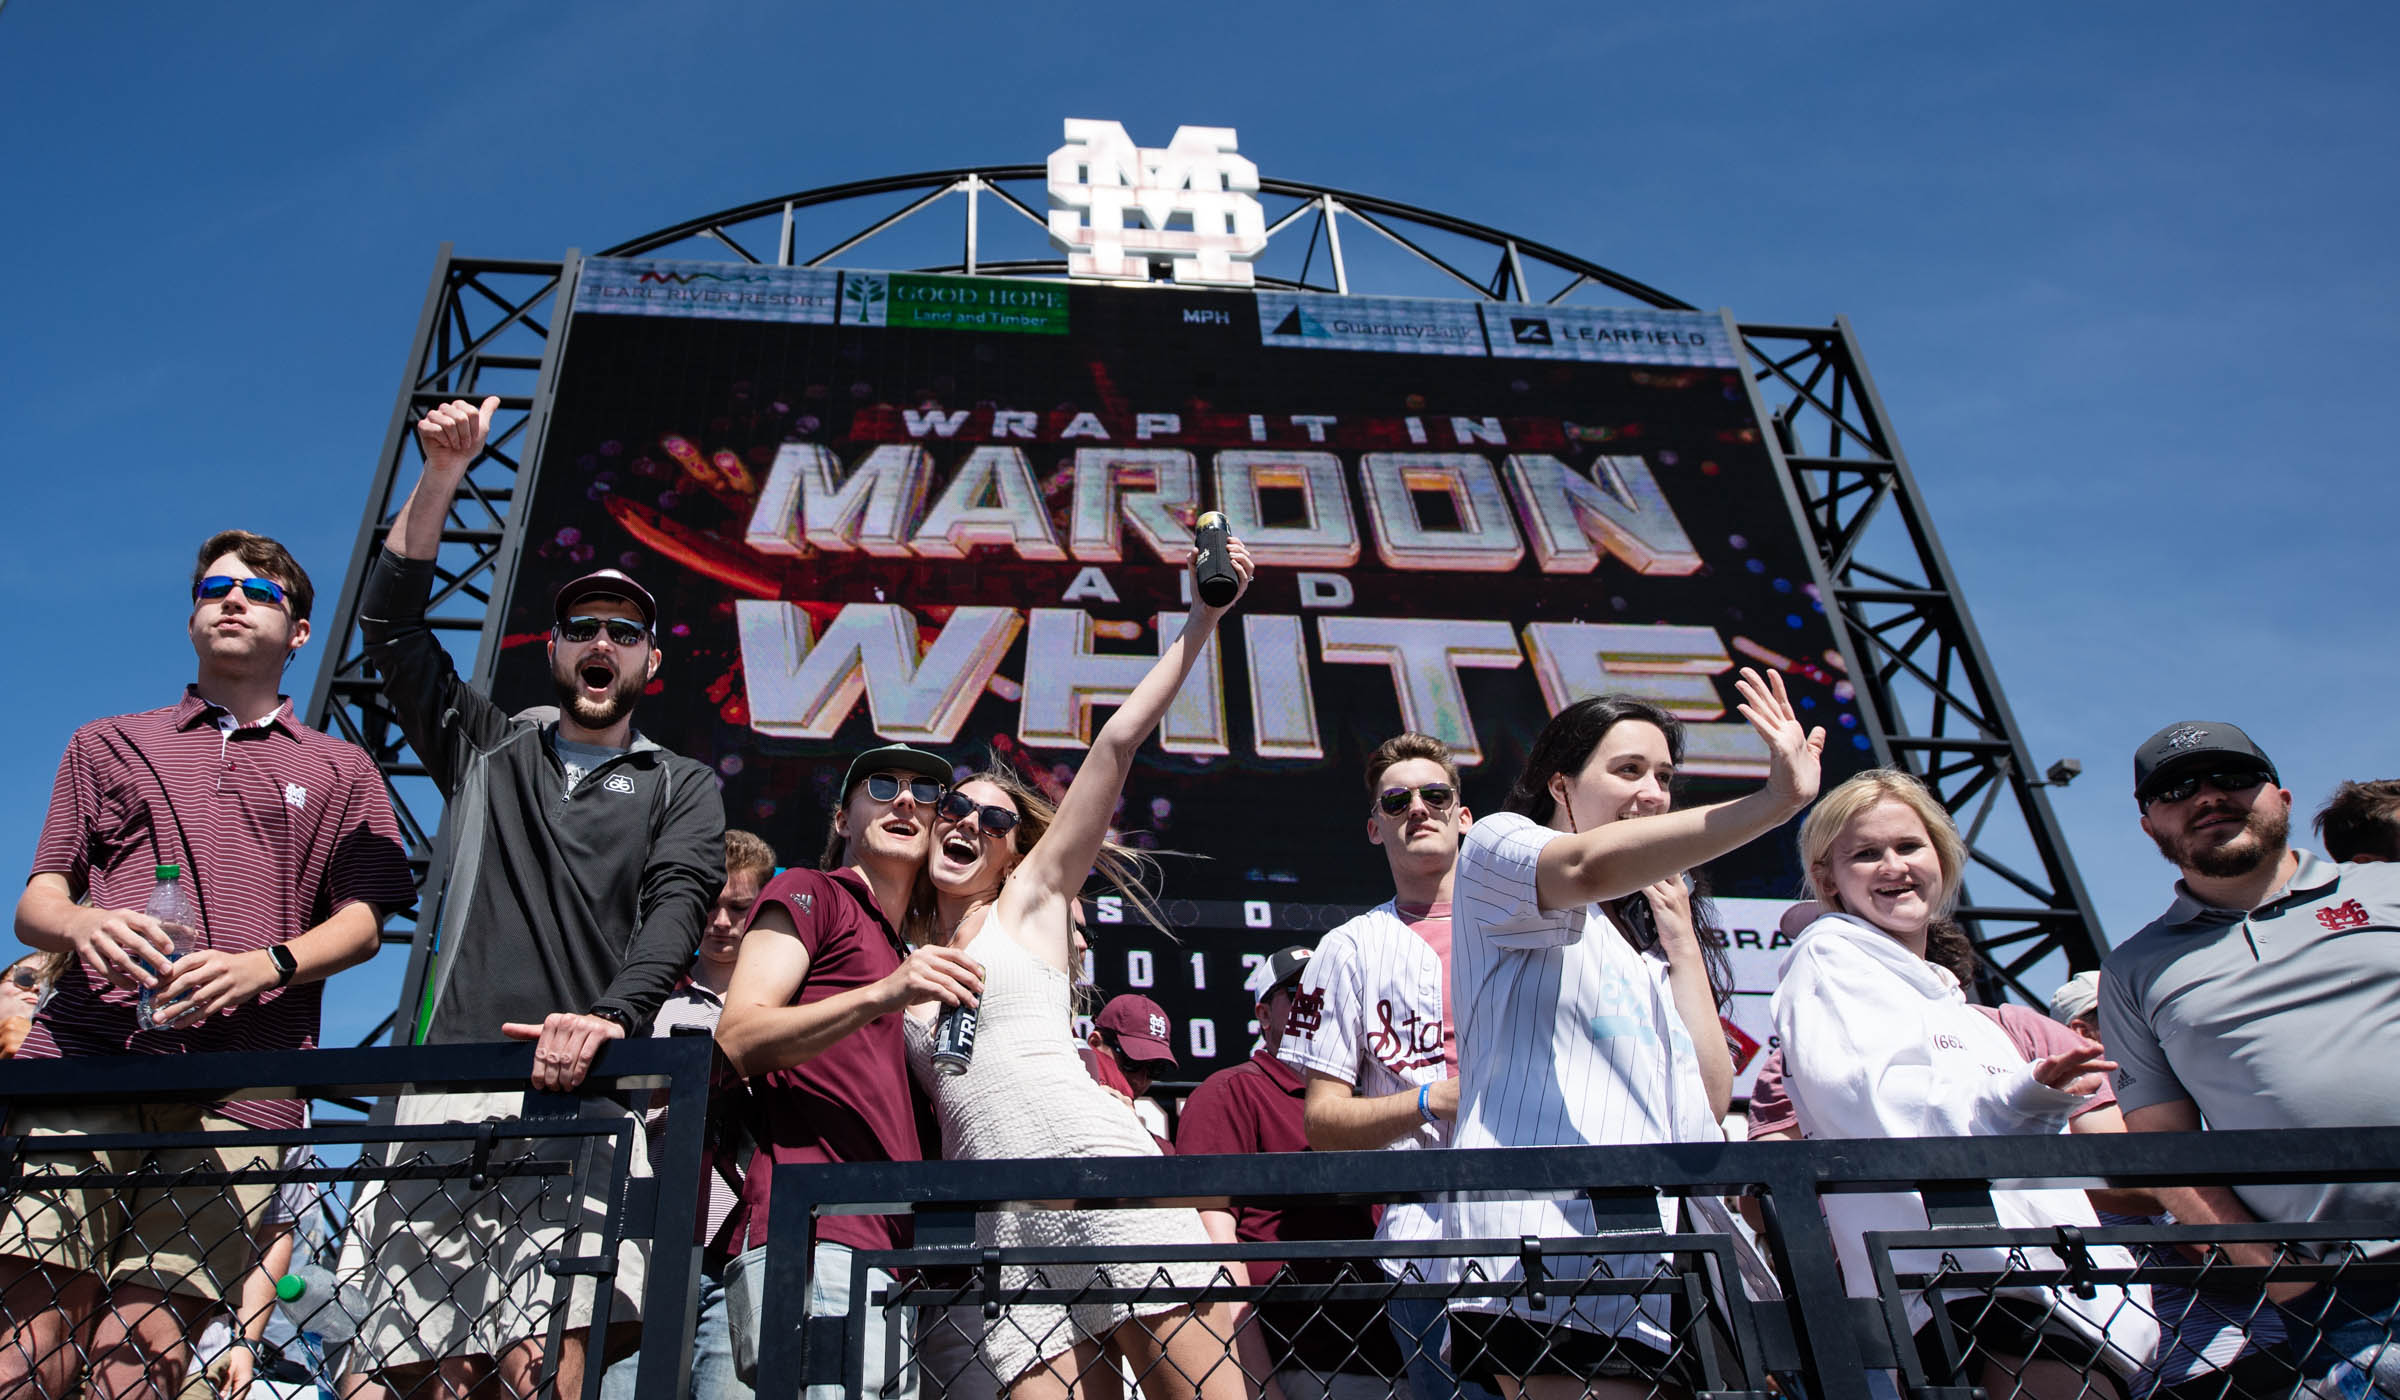 With &quot;Wrap it in Maroon and White&quot; on the Dudy Noble Scoreboard behind them, baseball fans cheer and celebrate in Left Field Lounge at the conclusion of the series against Ole Miss.